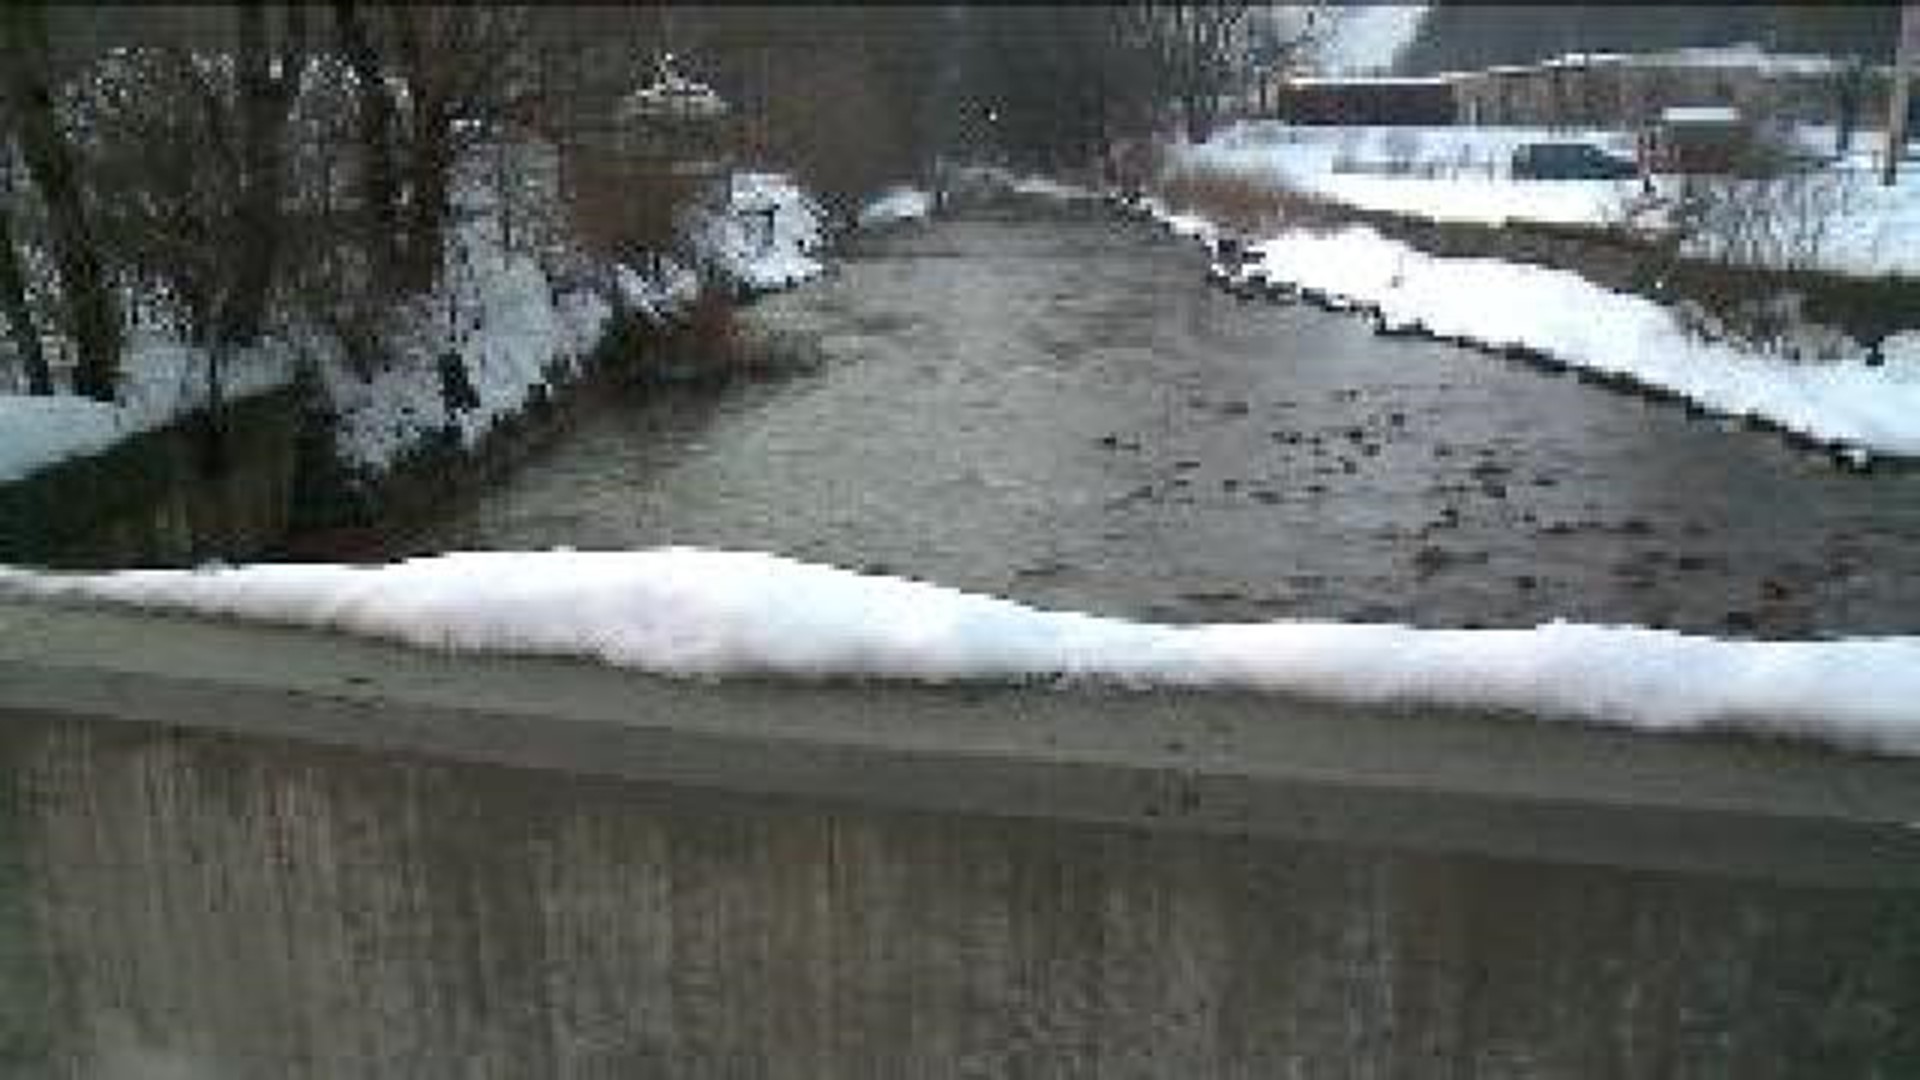 Flood Concerns As Snow Melts In Port Carbon; New Bridge To Come